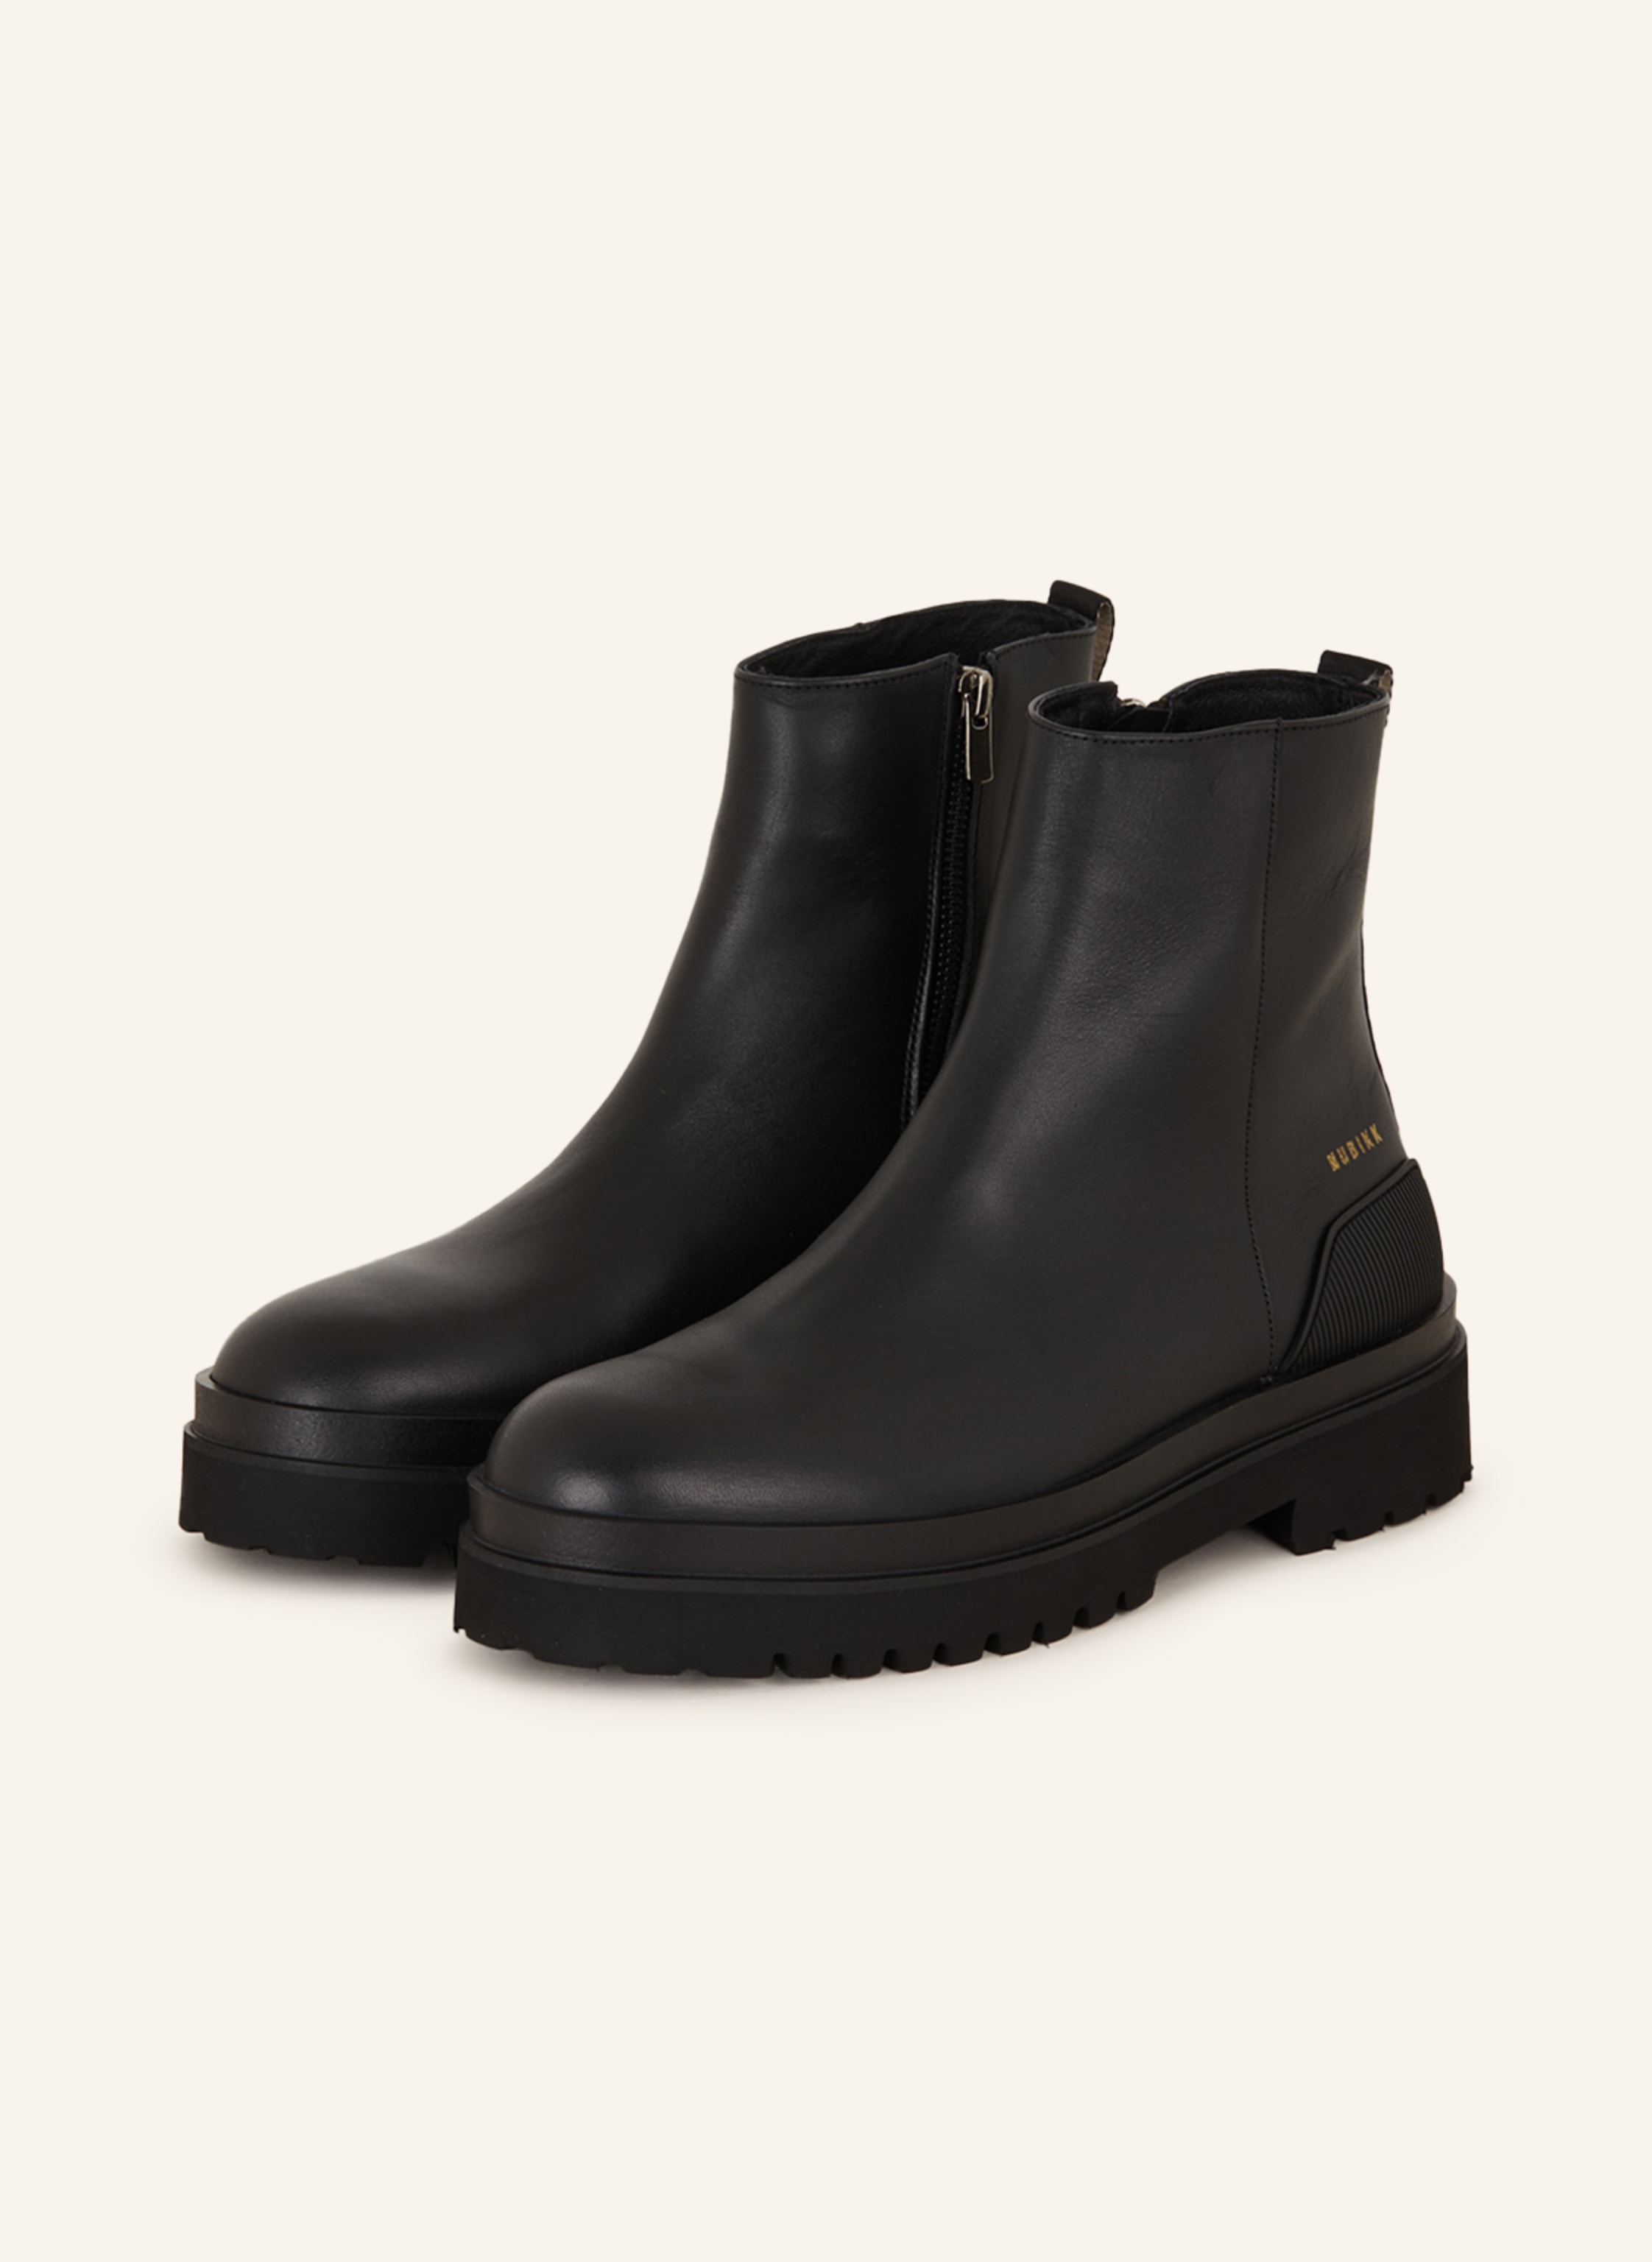 Office Career Boots FREE SHIPPING Shoes, 58% OFF